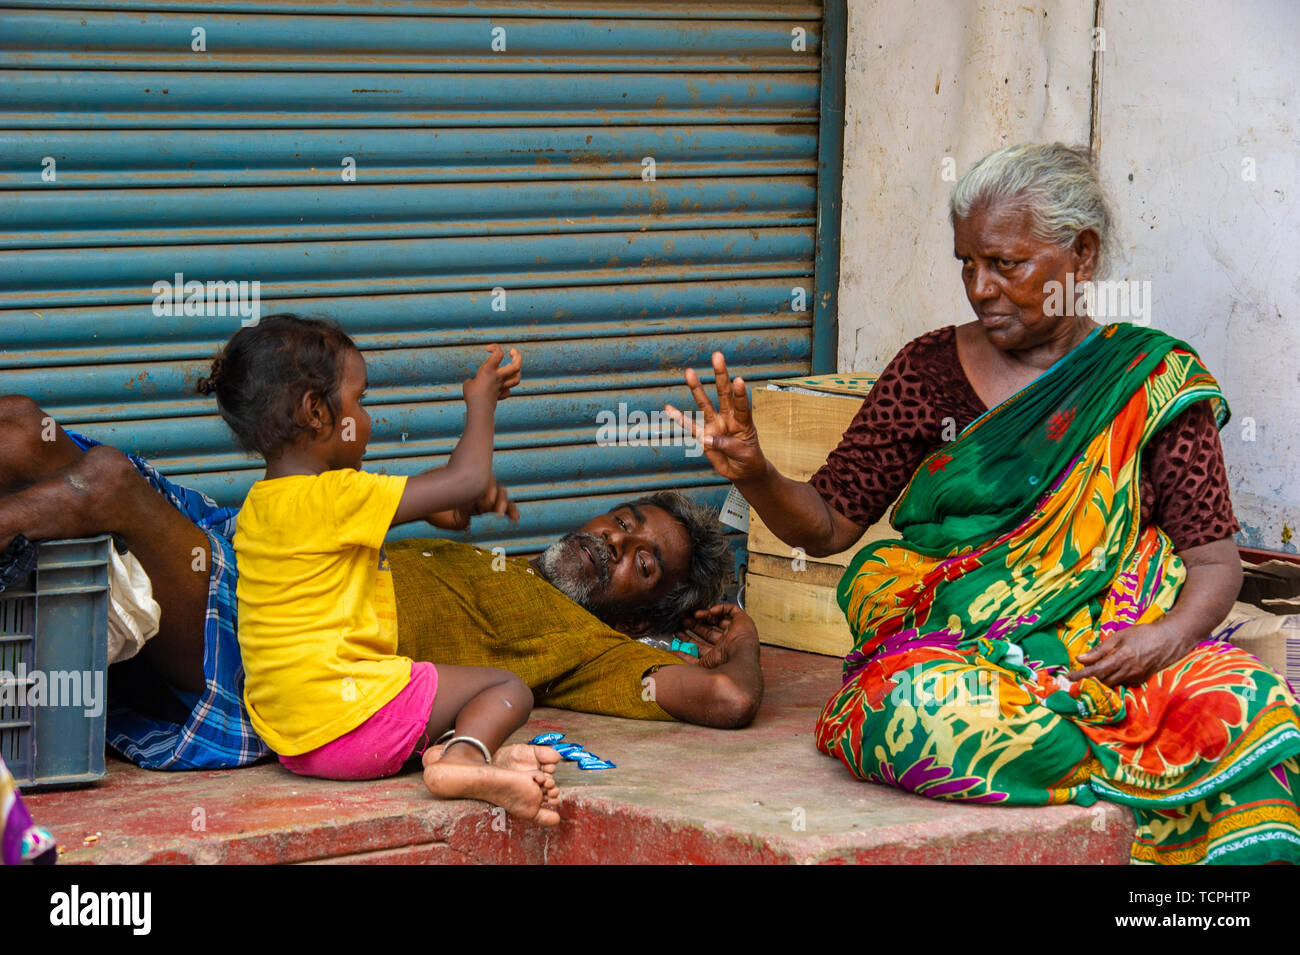 Poverty in Chennai, India, where three generations of a family play a game together Stock Photo